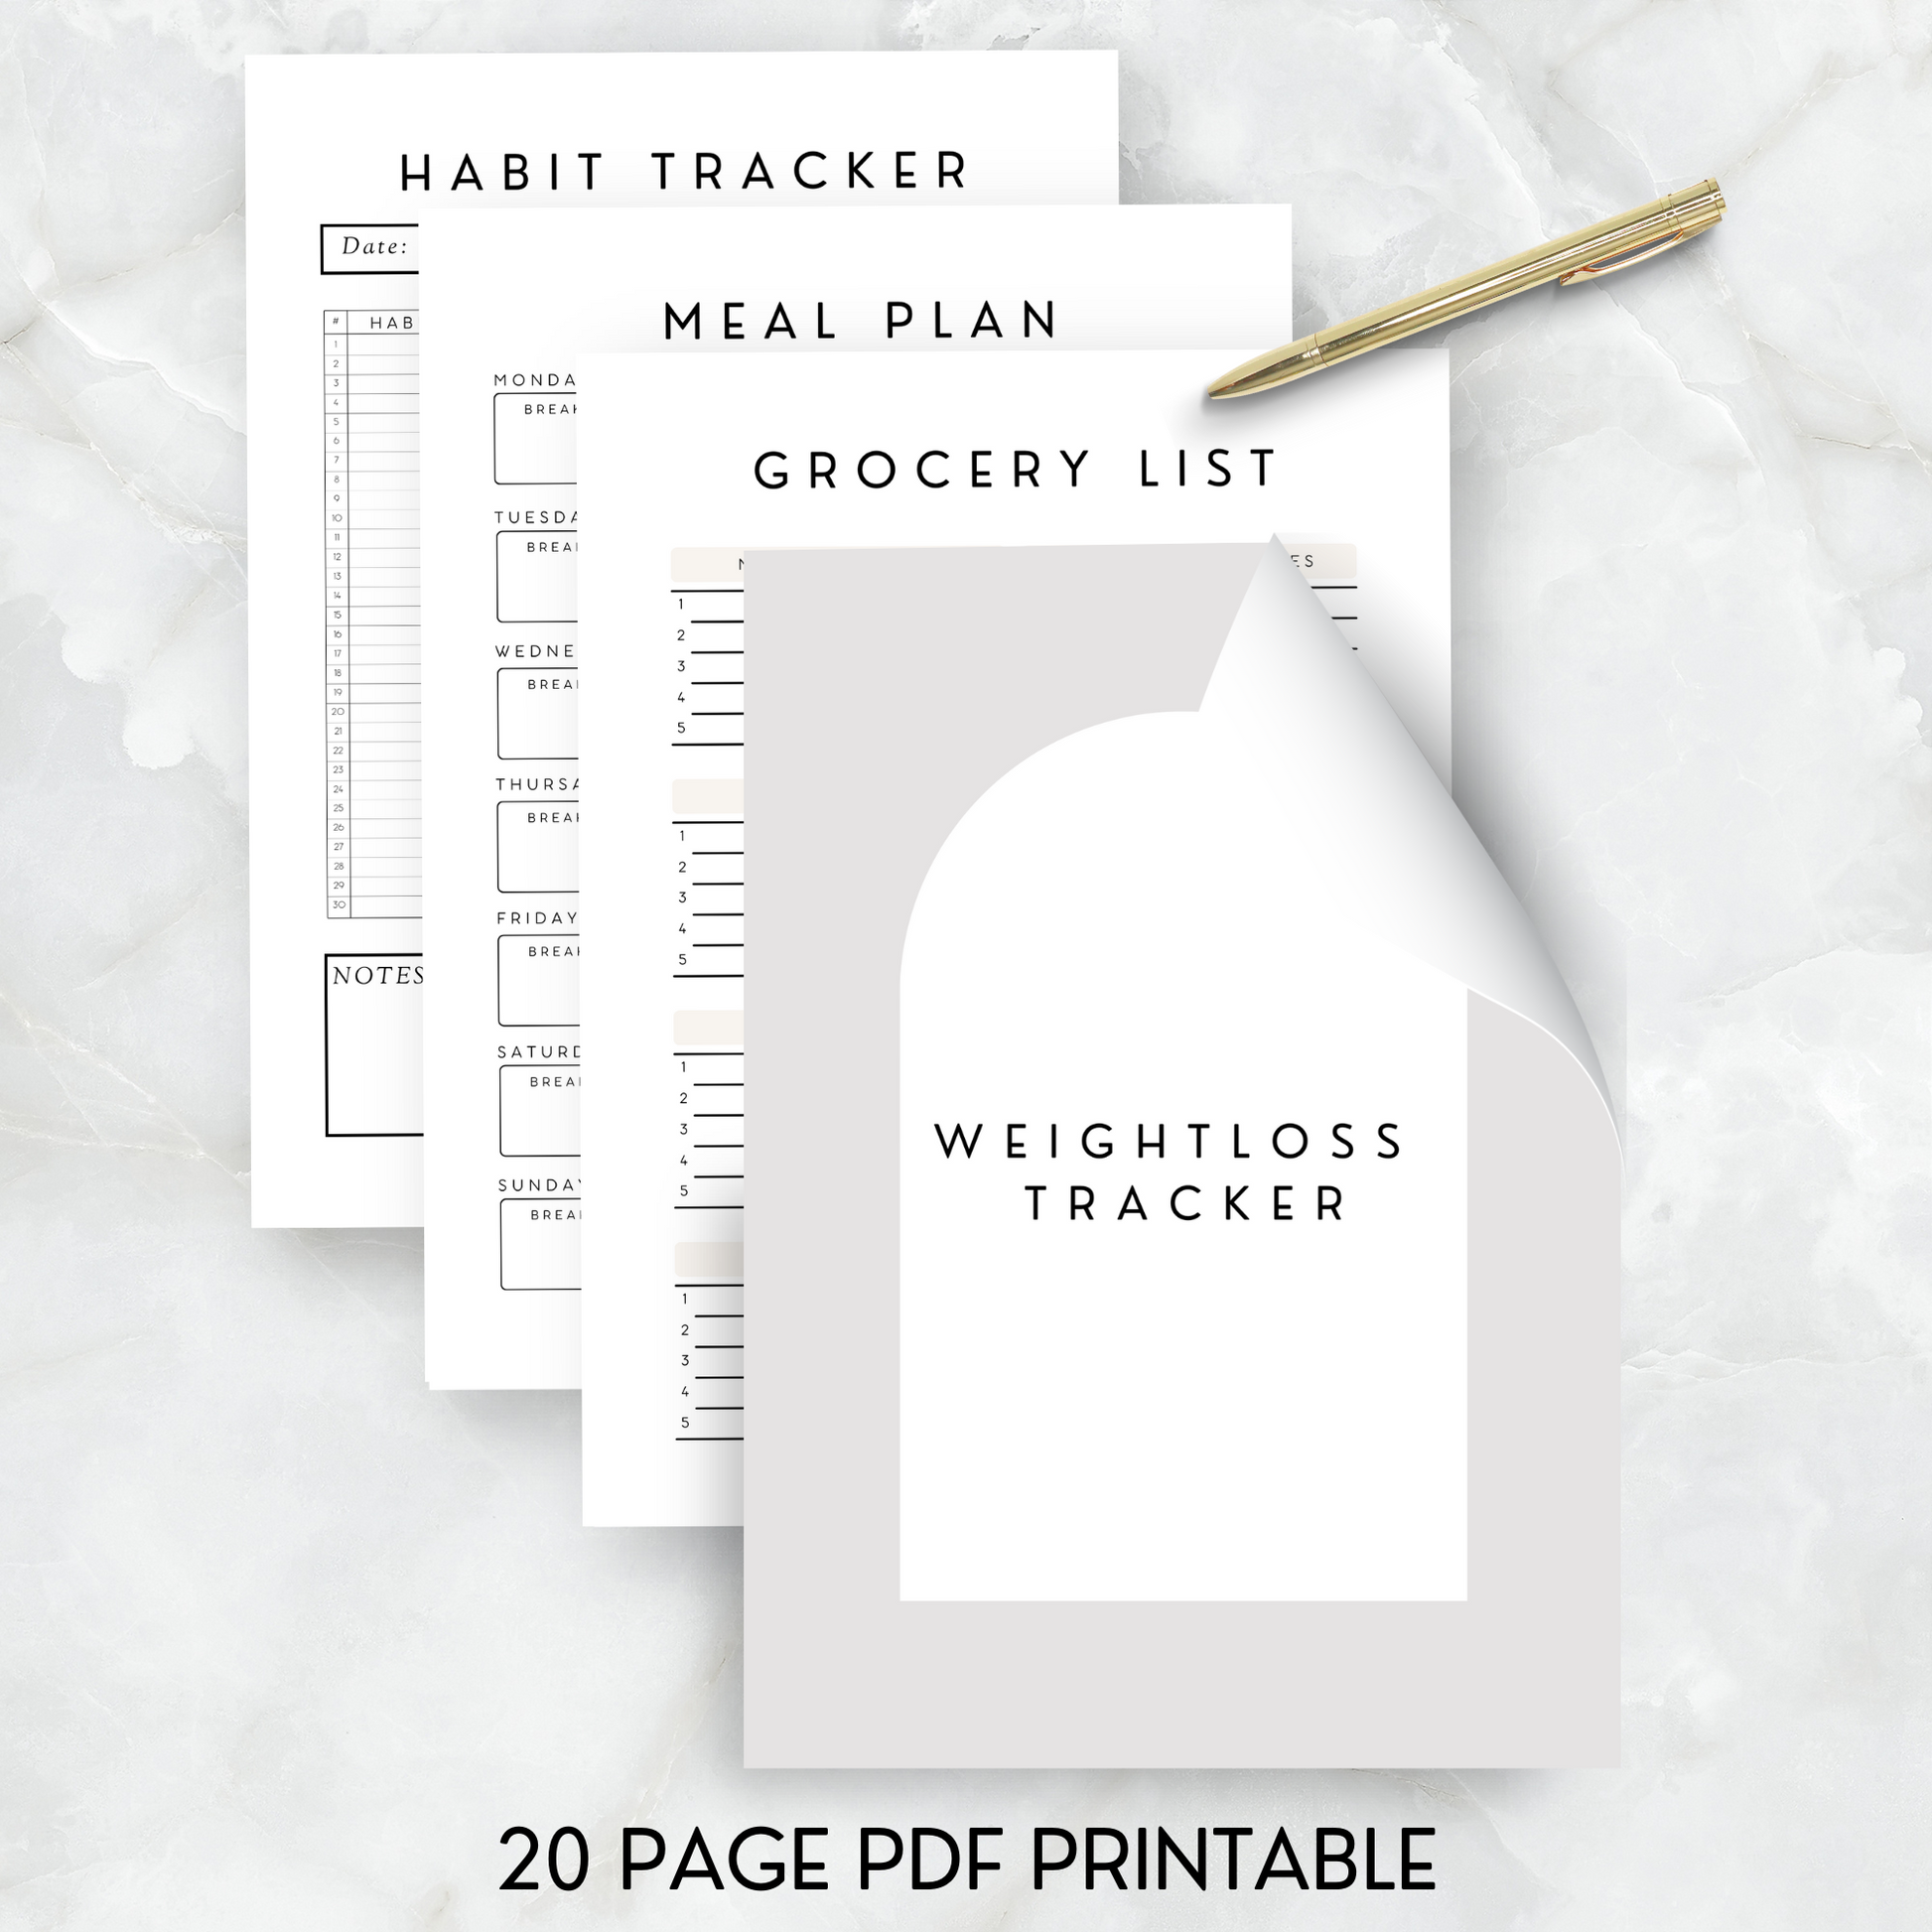 weight loss tracker fitness planner. pdf printable. grocery list, meal plan